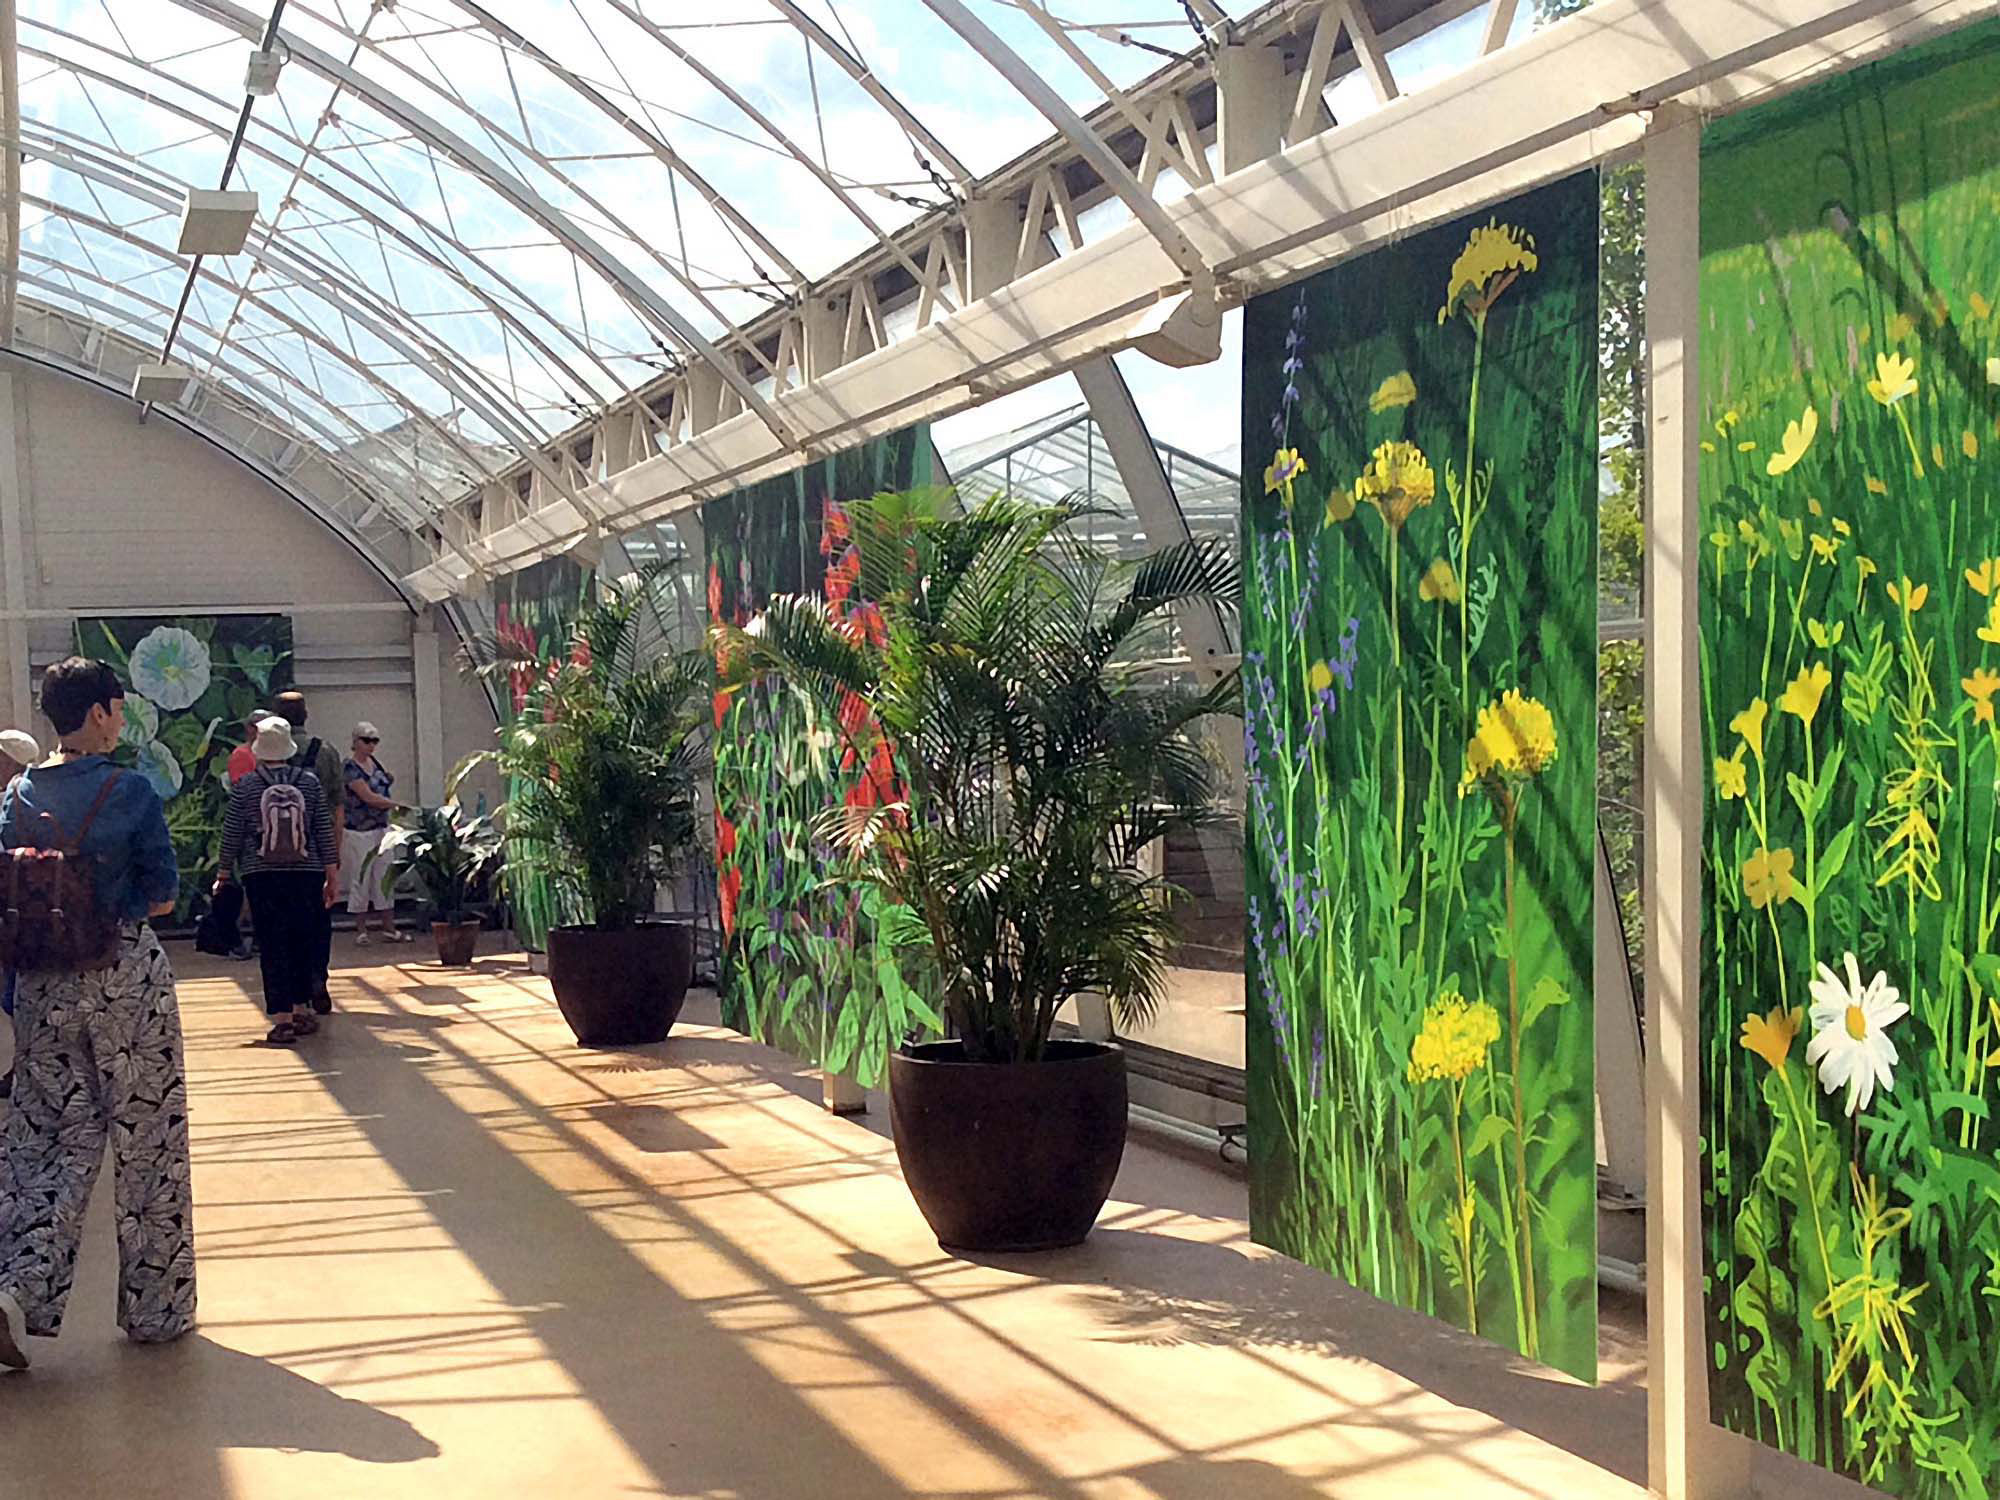 Press Release - Installation. 'Andy Maitland, The Digital Garden® 2018, iPad drawings with Augmented Reality, Royal Horticultural Society Garden, Wisley, UK'.